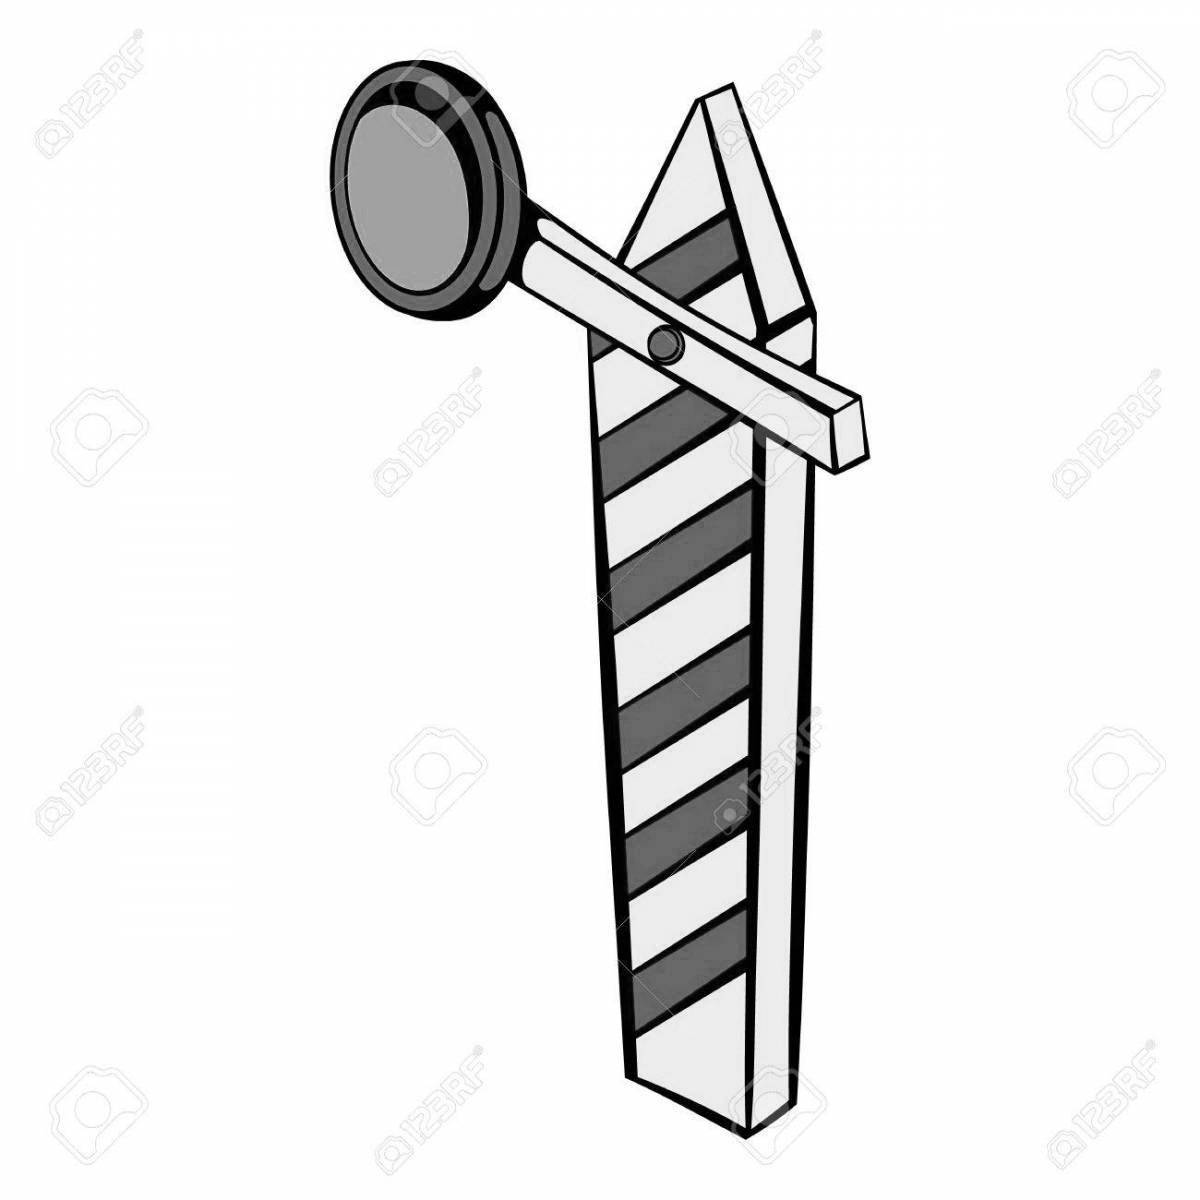 Animated semaphore coloring page